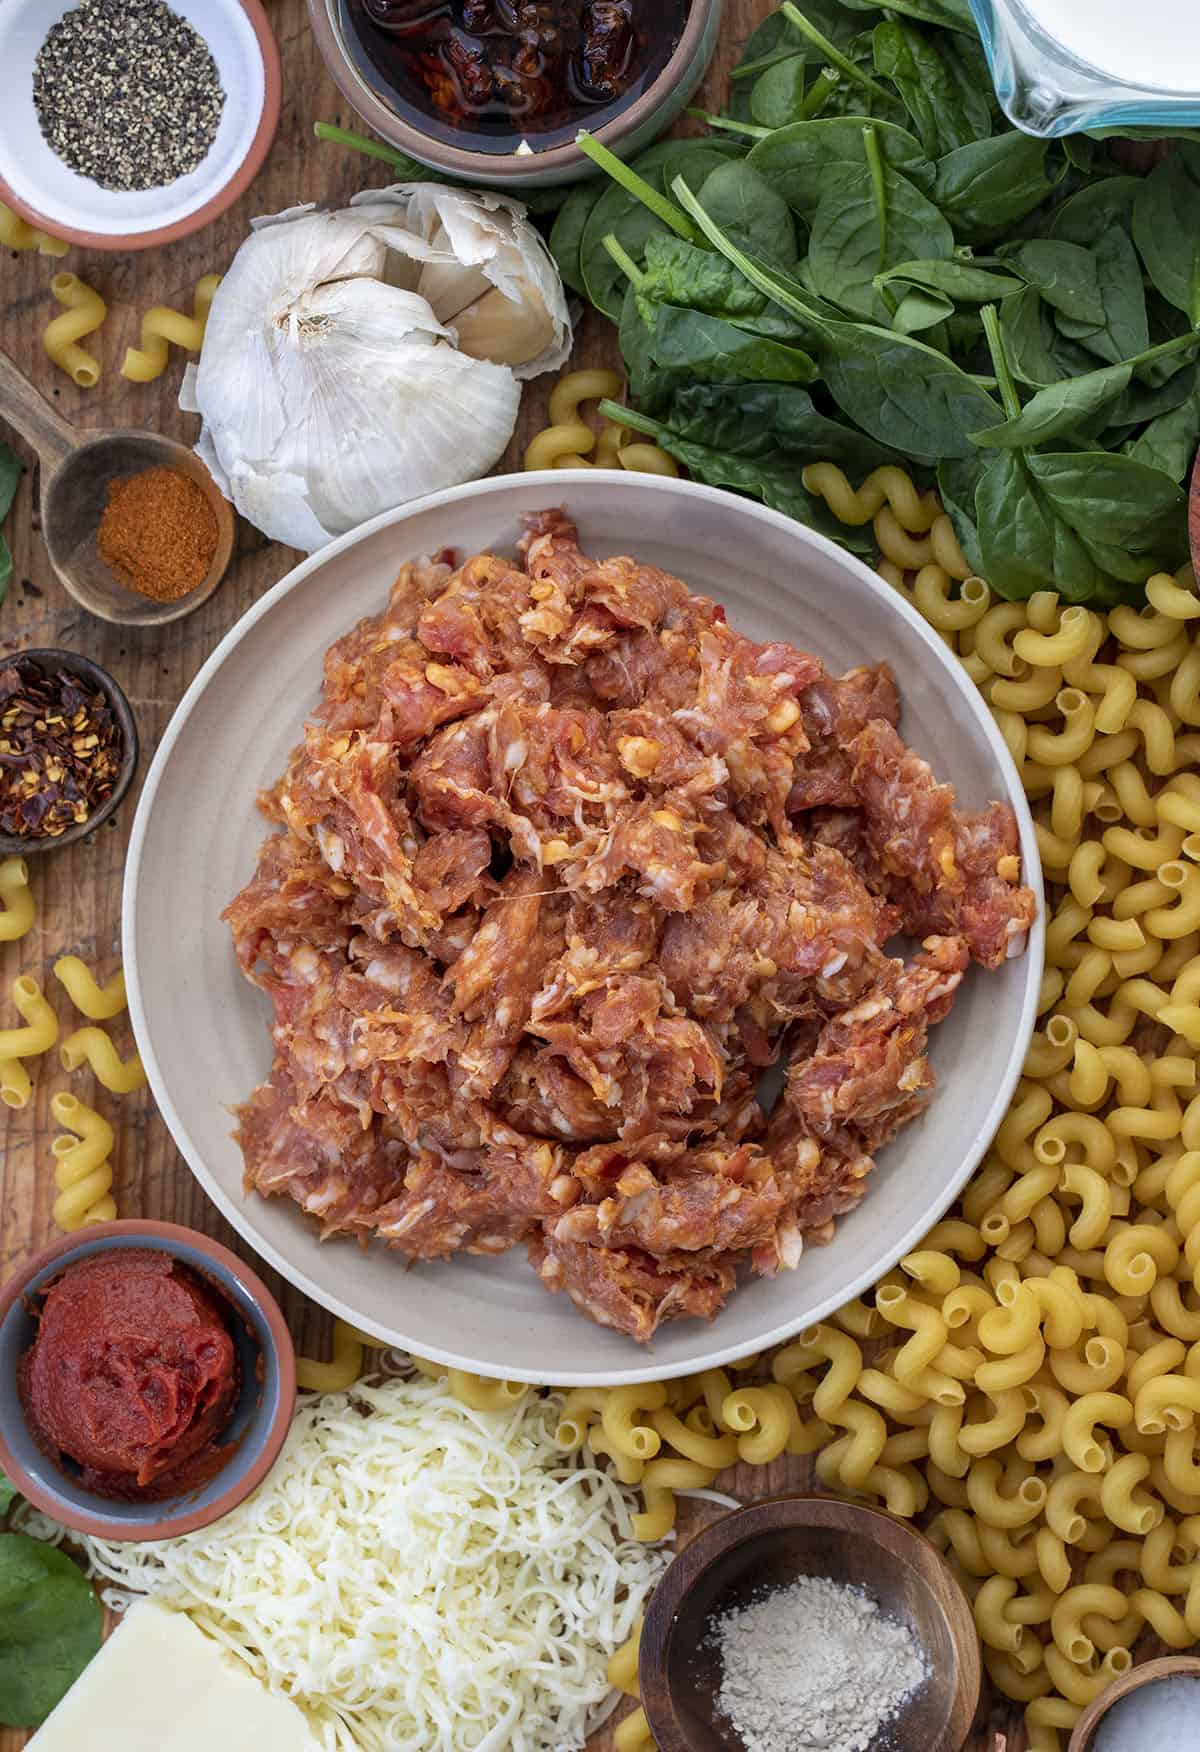 Raw Ingredients on a Cutting Board that Make up Spicy Sausage Cavatappi. Dinner, Supper, Spicy Sausage Recipes, Dinner Recipes, Best Pasta Recipes, Pasta, Whats for Dinner, recipes, i am homesteader, iamhomesteader, viral tiktok